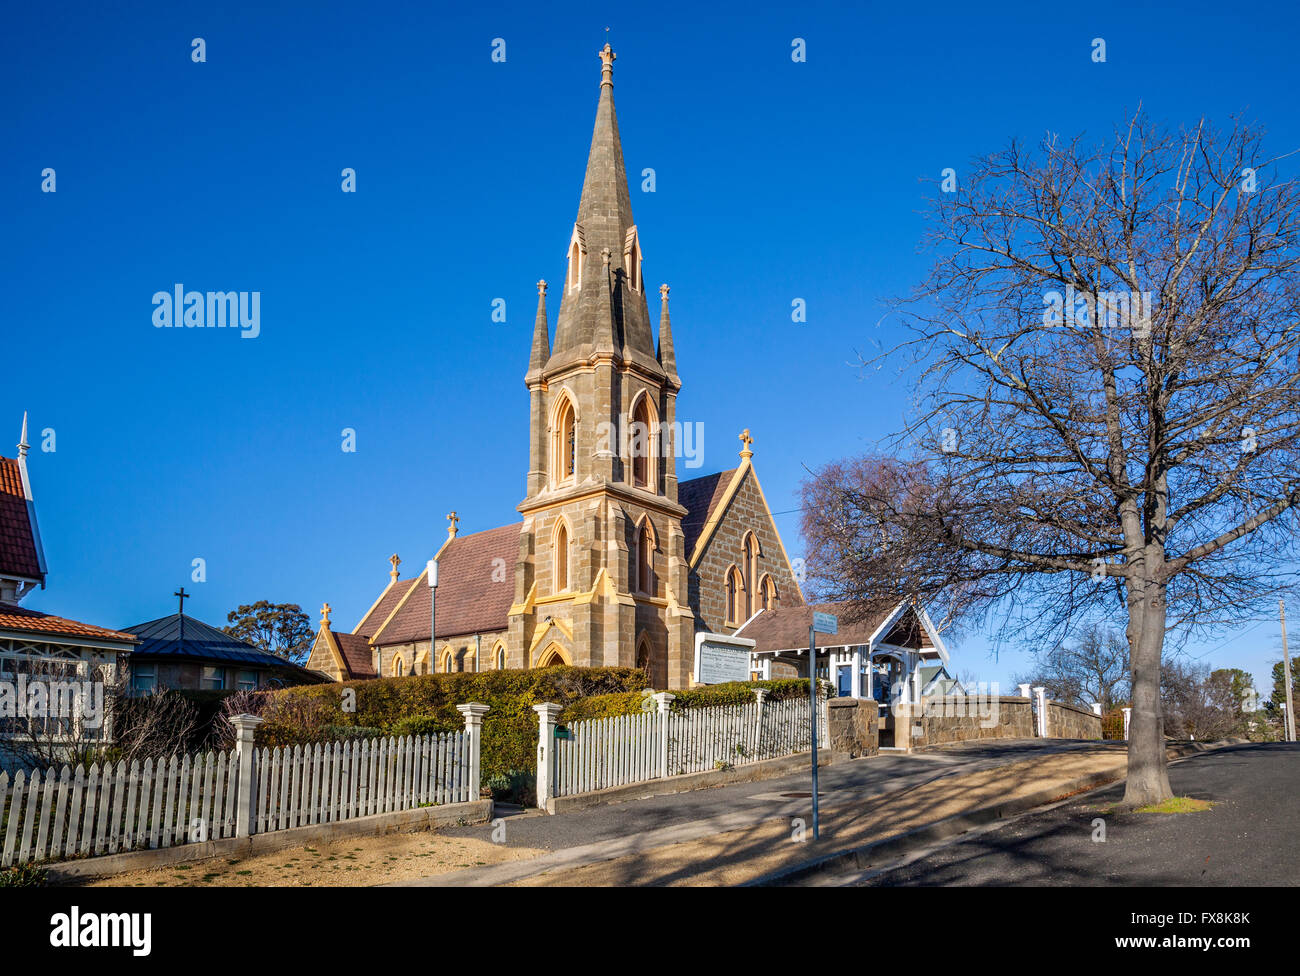 Australia, New South Wales, Monaro region, Cooma, view of St. Paul's Anglican Church Stock Photo